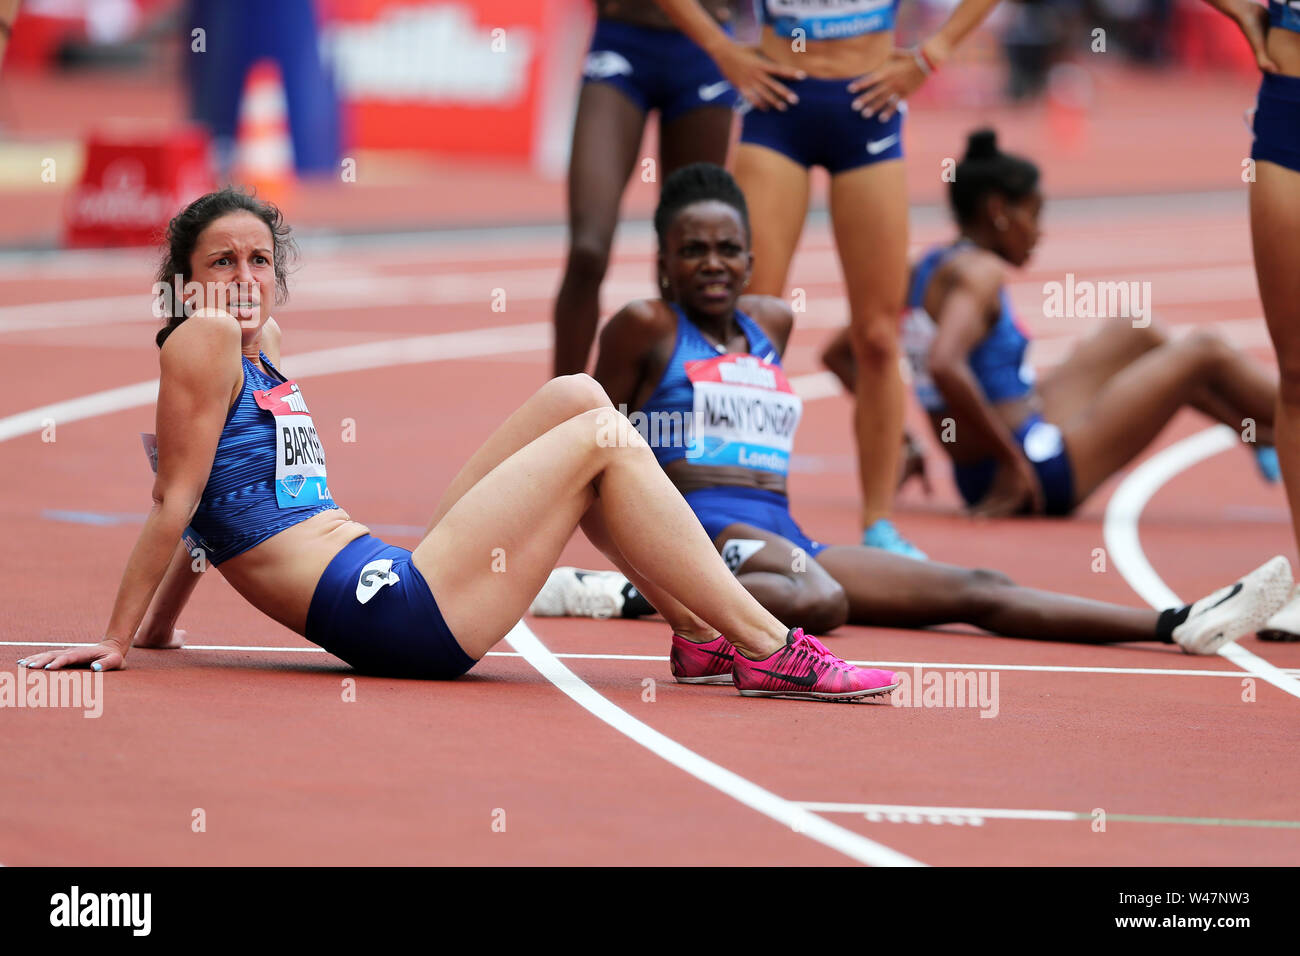 London, UK. 20th July 19. Daryia BARYSEVICH (Belarus) exhausted after competing in the Women's 1500m Final at the 2019, IAAF Diamond League, Anniversary Games, Queen Elizabeth Olympic Park, Stratford, London, UK. Credit: Simon Balson/Alamy Live News Stock Photo